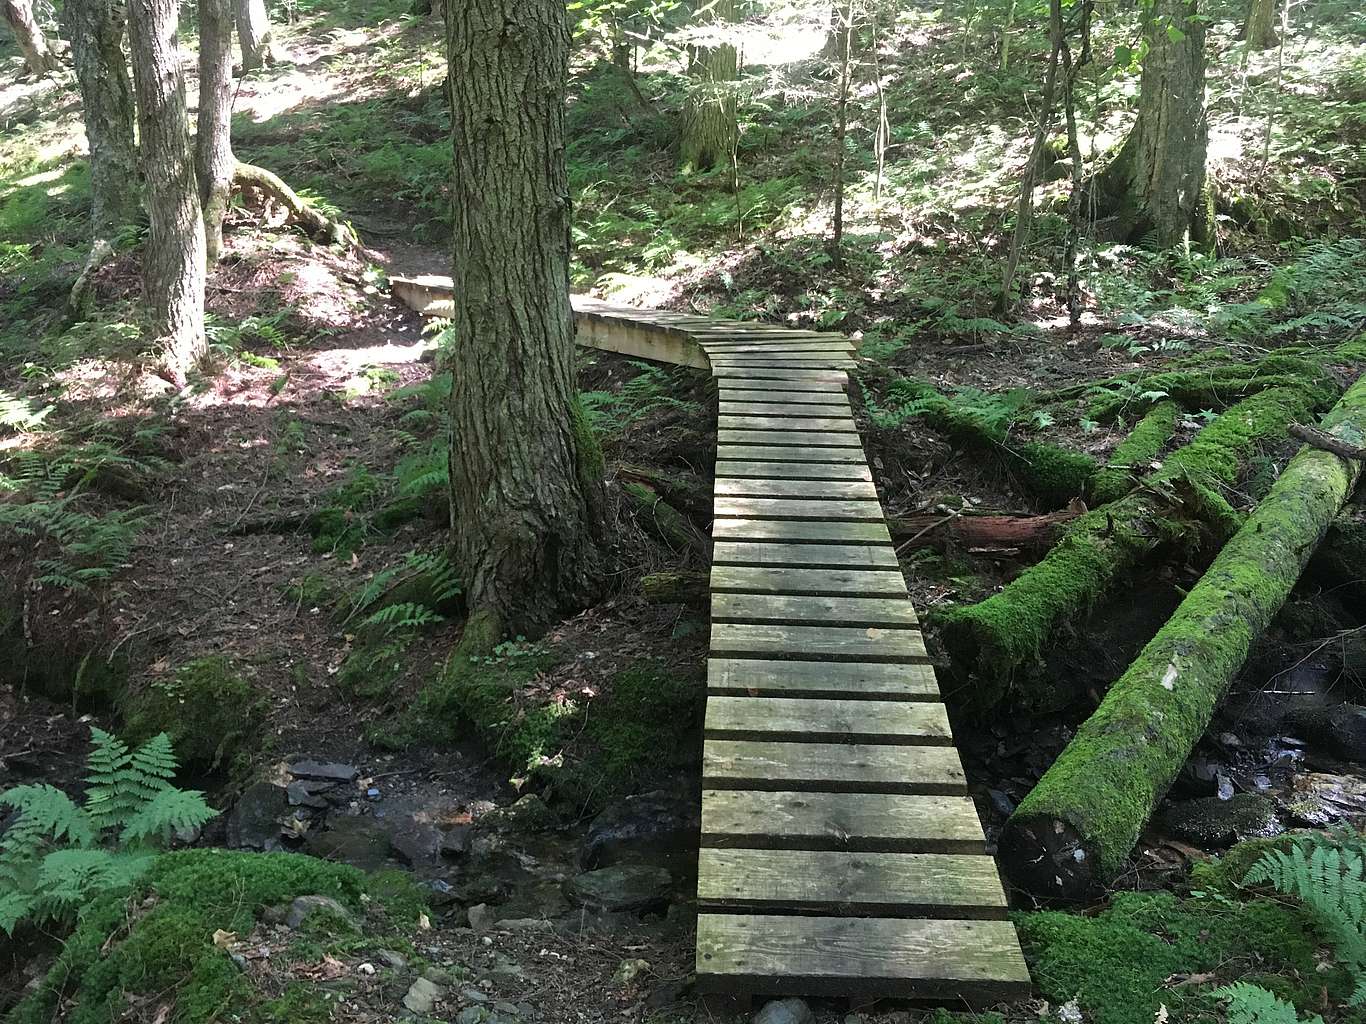 A small wooden bridge through the forest